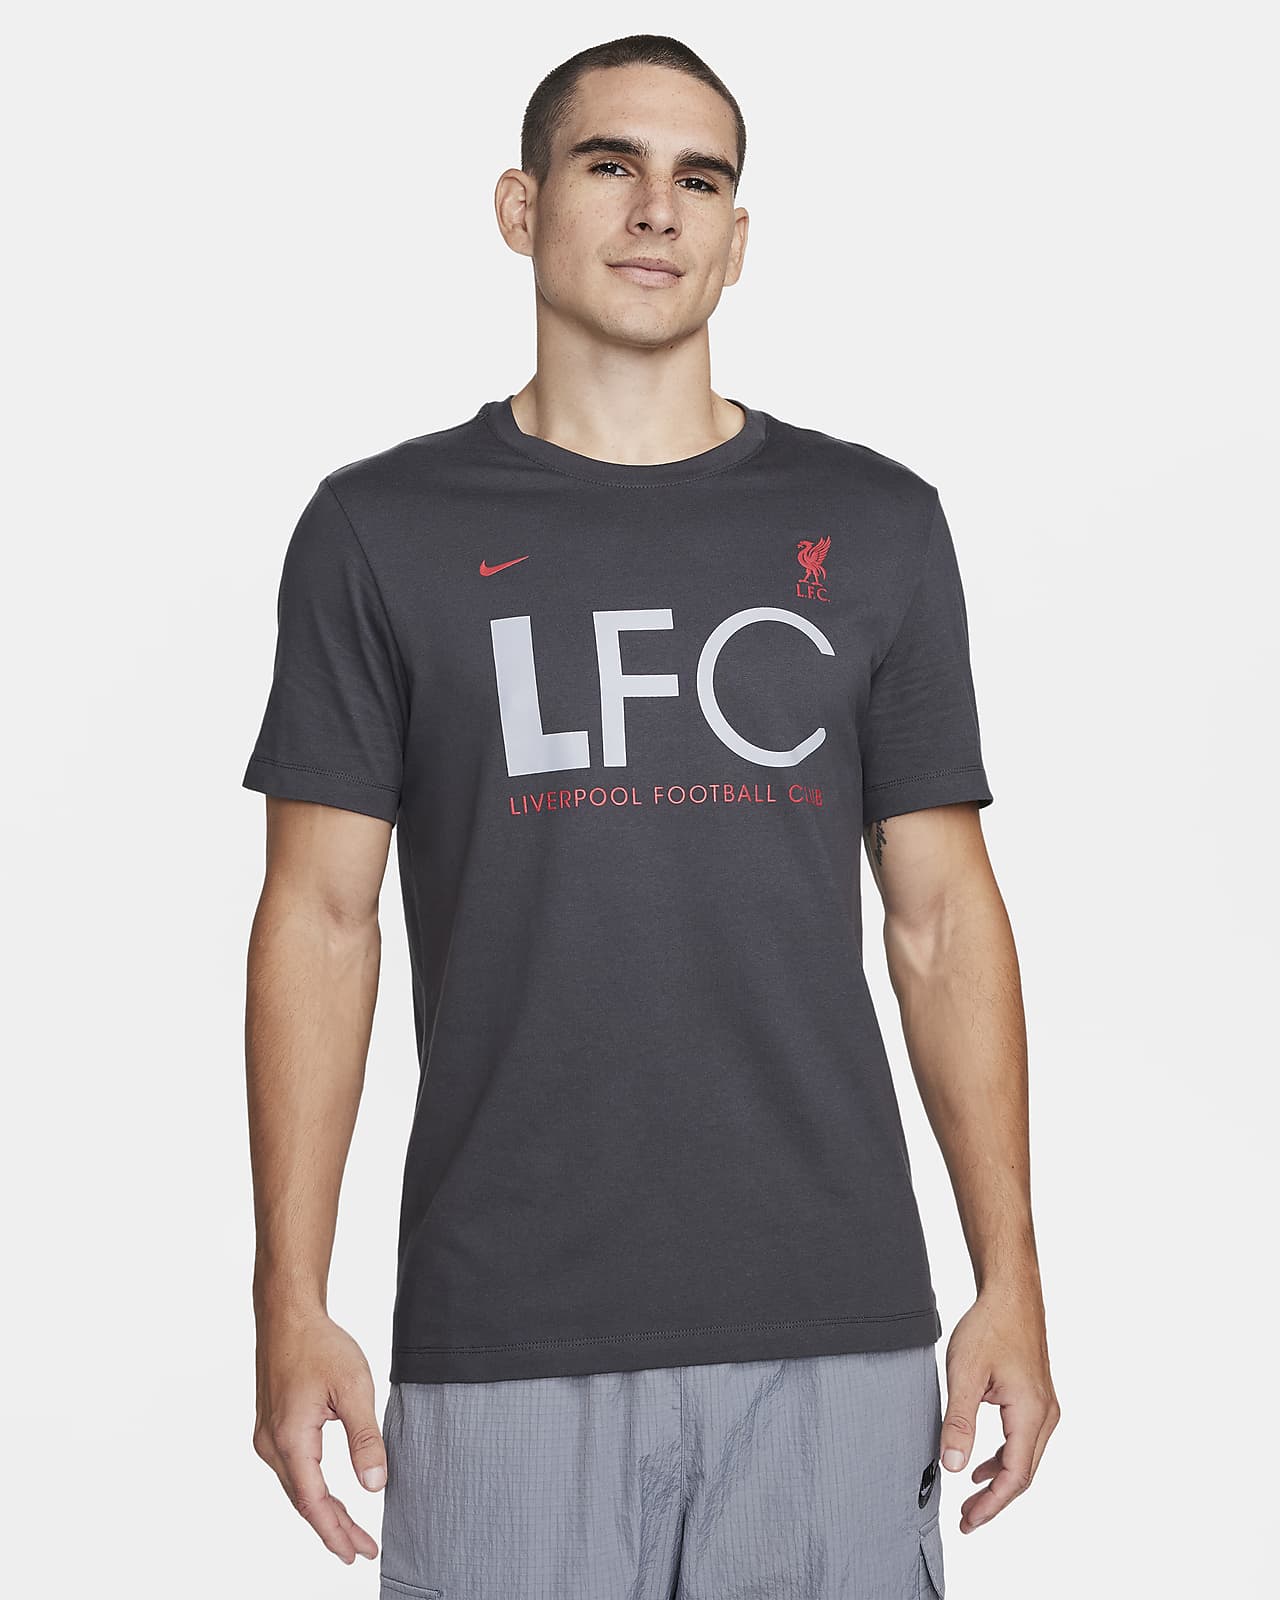 T-shirt Nike Football Liverpool FC Mercurial pour homme